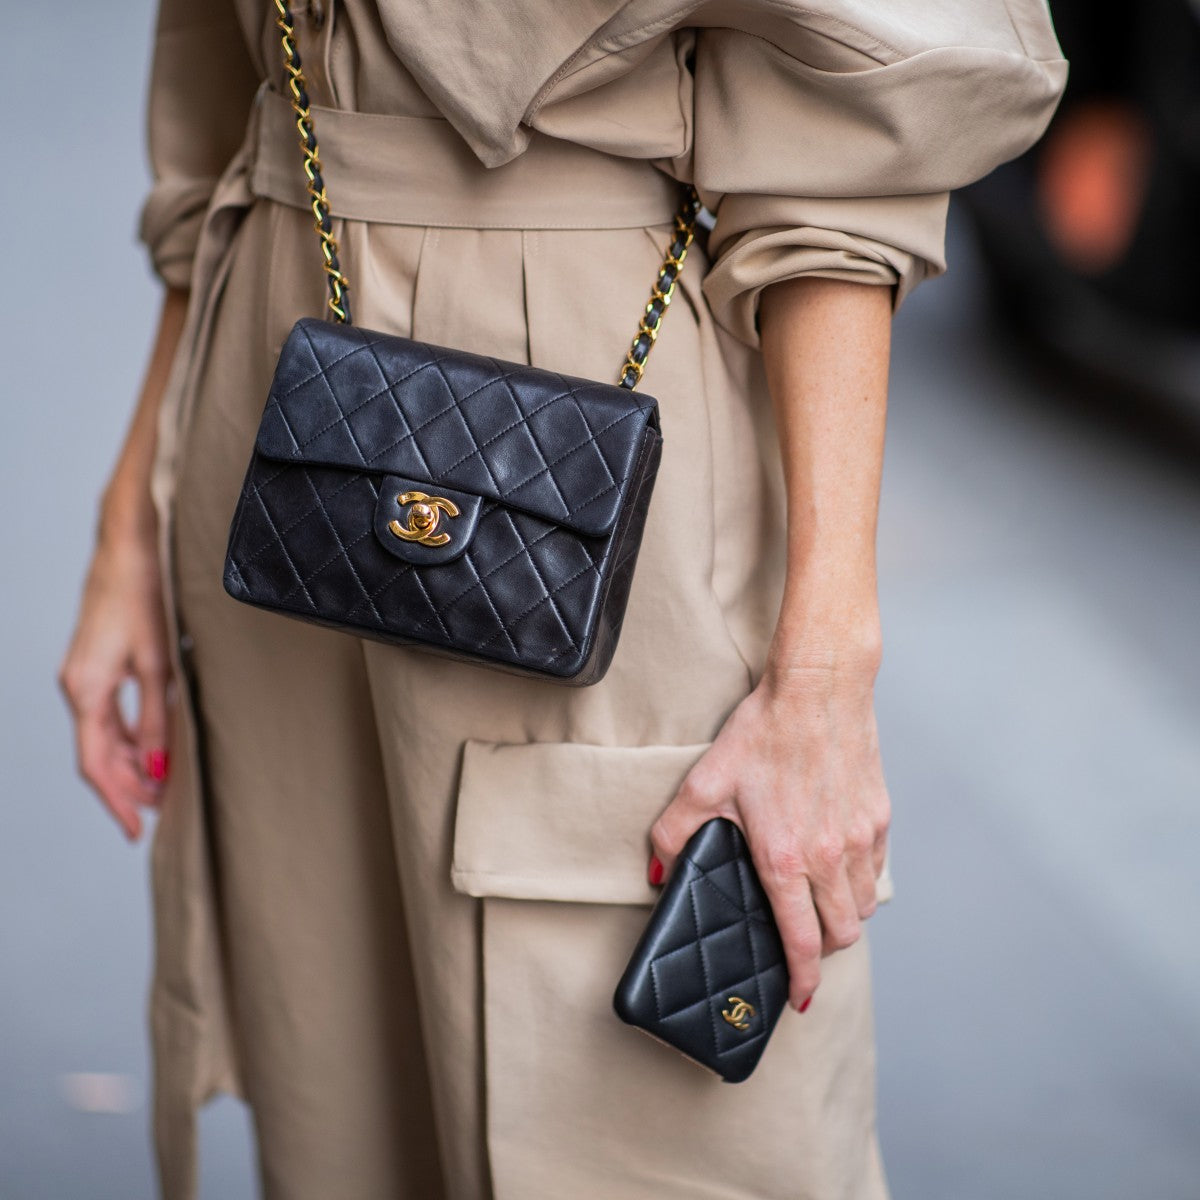 Do you know? Chanel designer bag is a hefty well-spent investment on the  pocket that